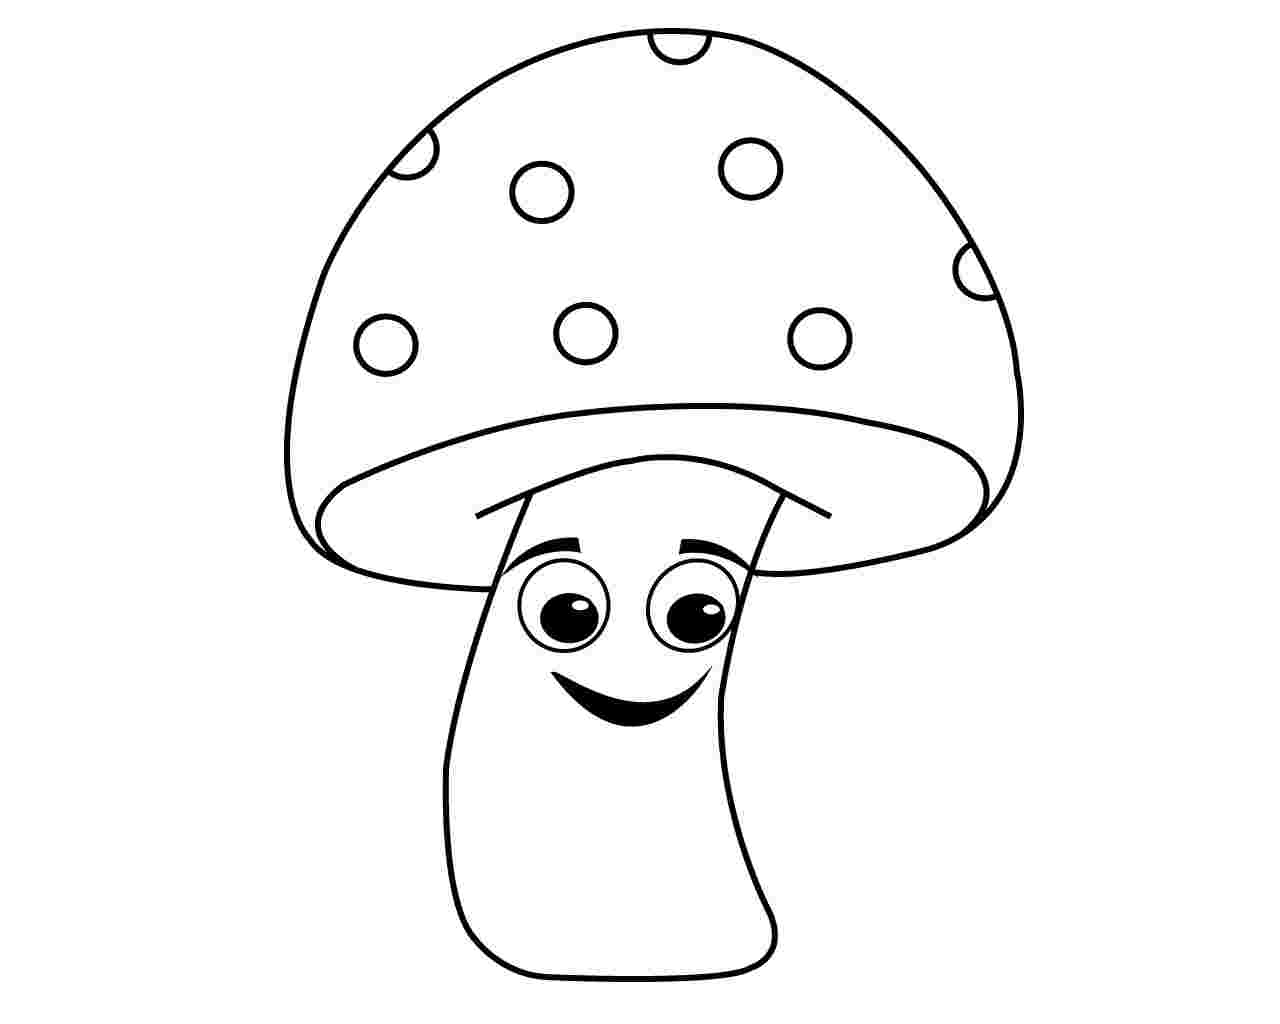 Just Coloring: Free Mushroom Coloring Pages Printable ...